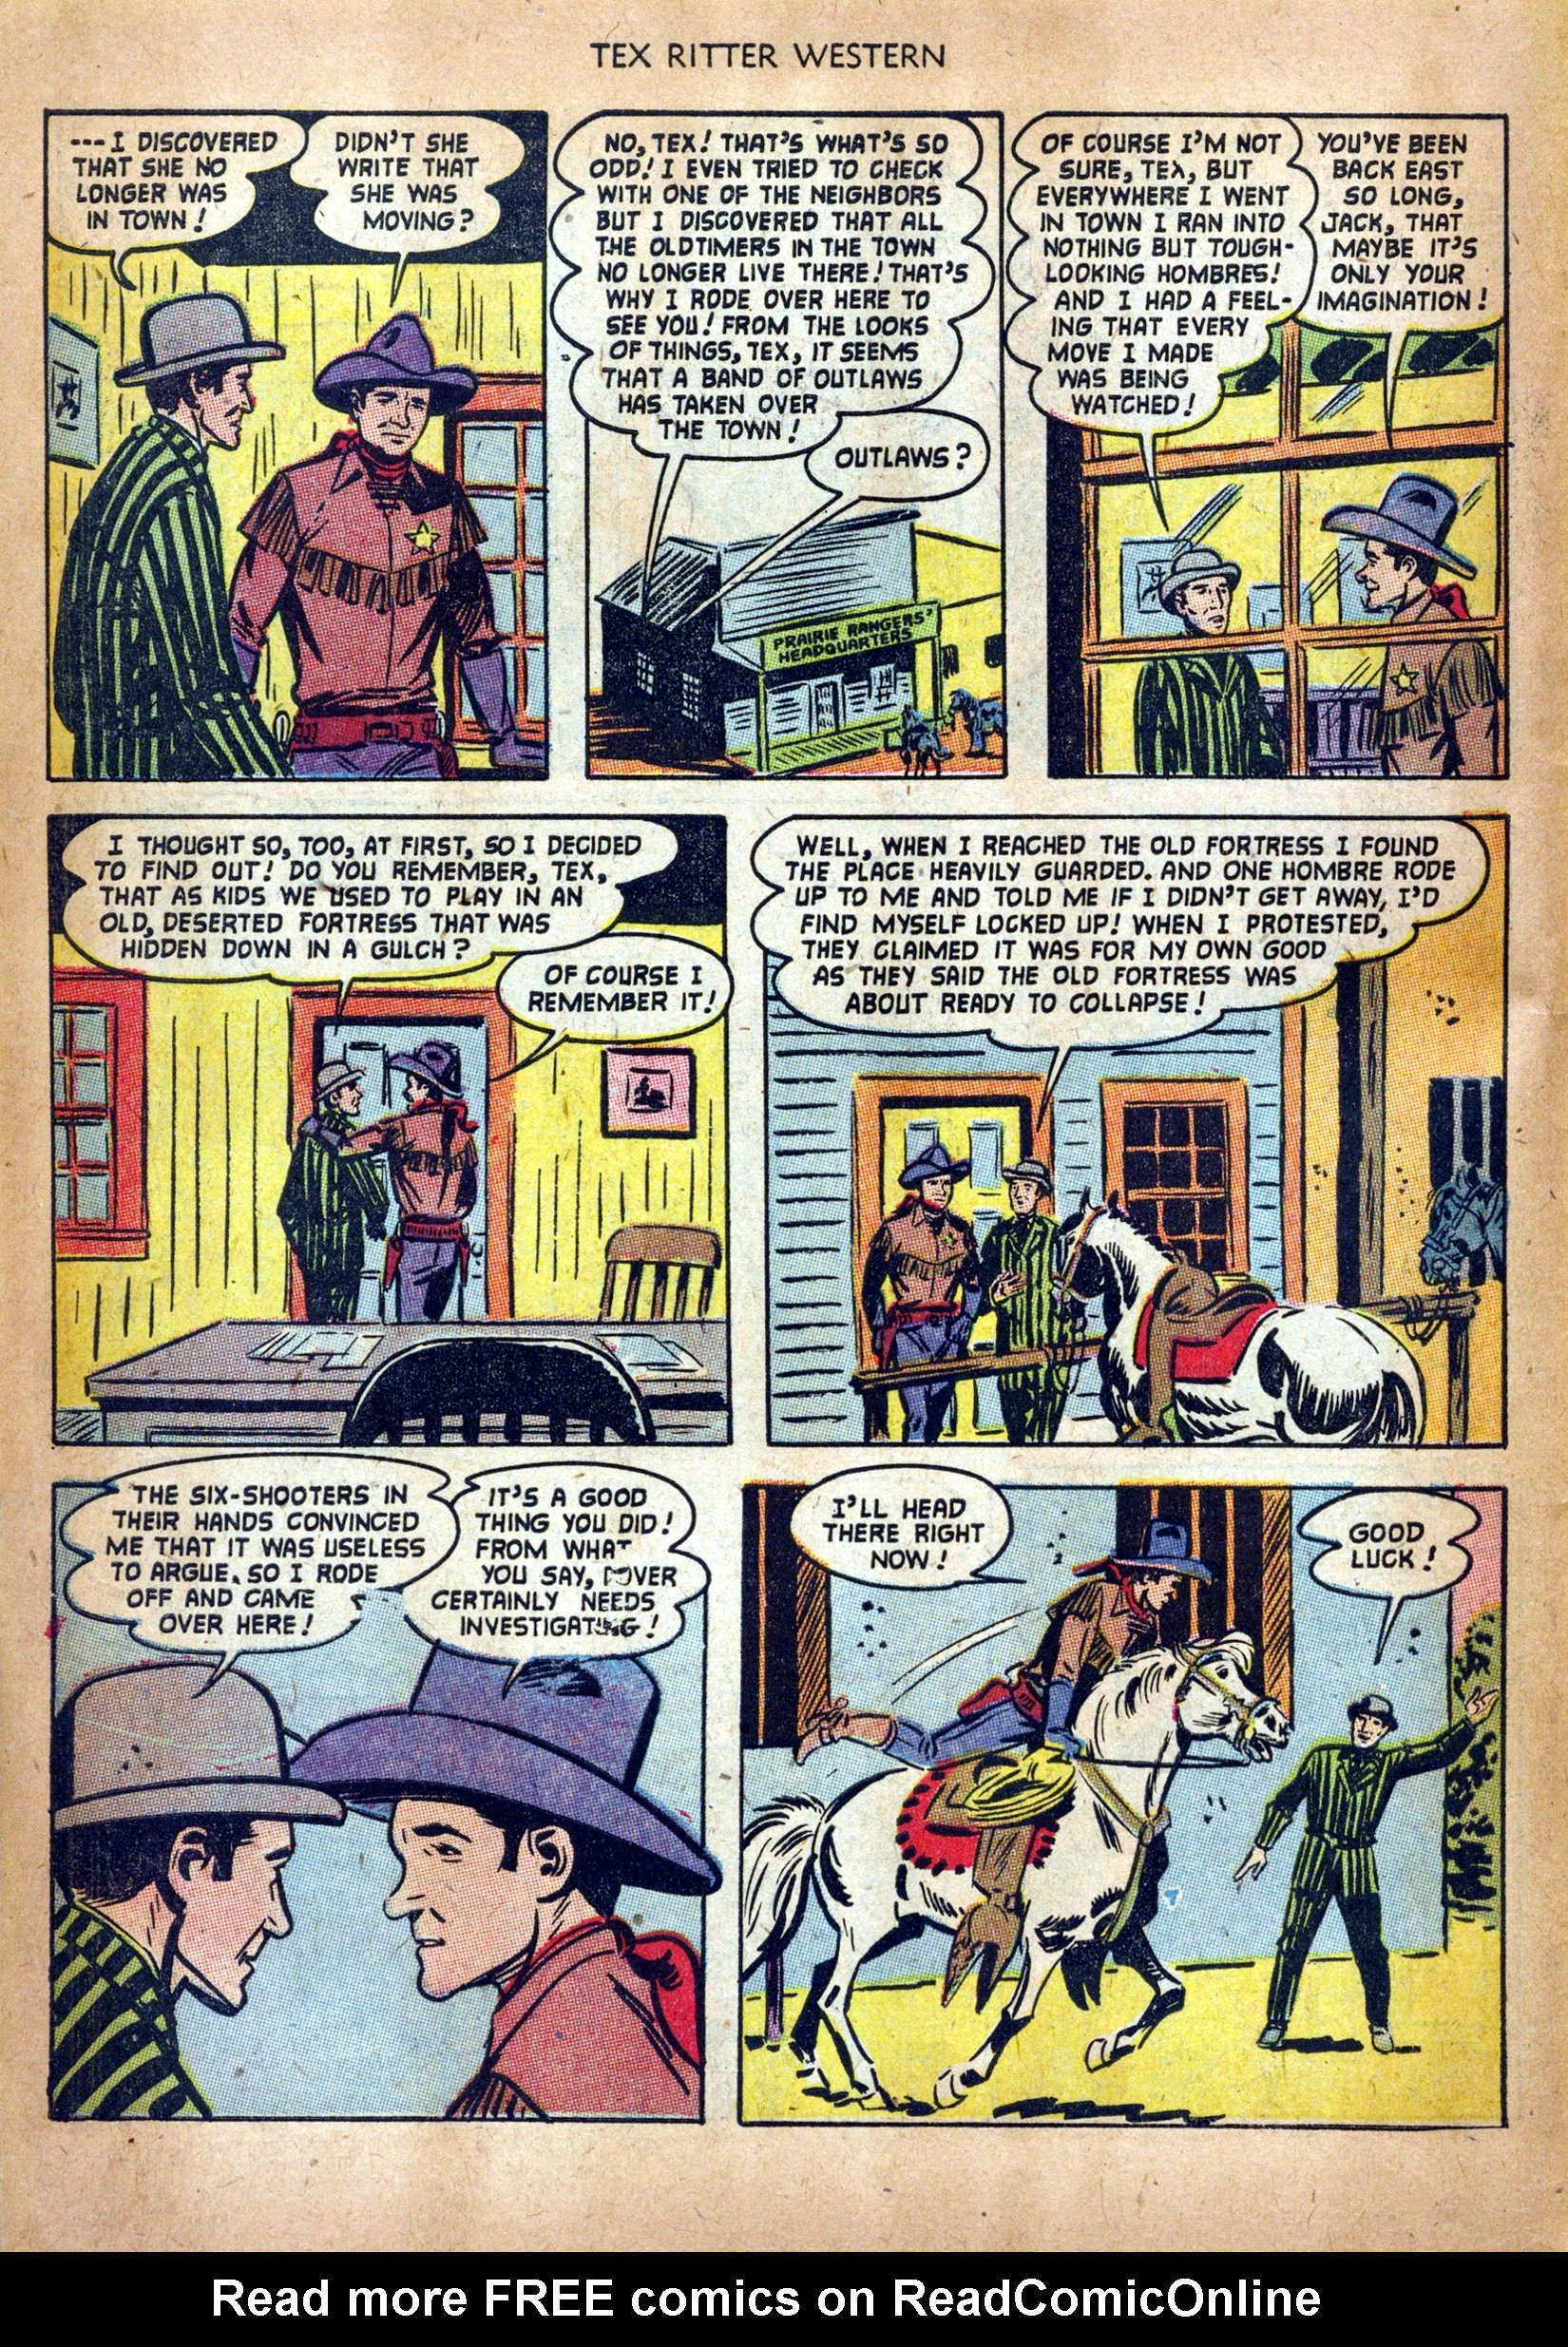 Read online Tex Ritter Western comic -  Issue #17 - 6